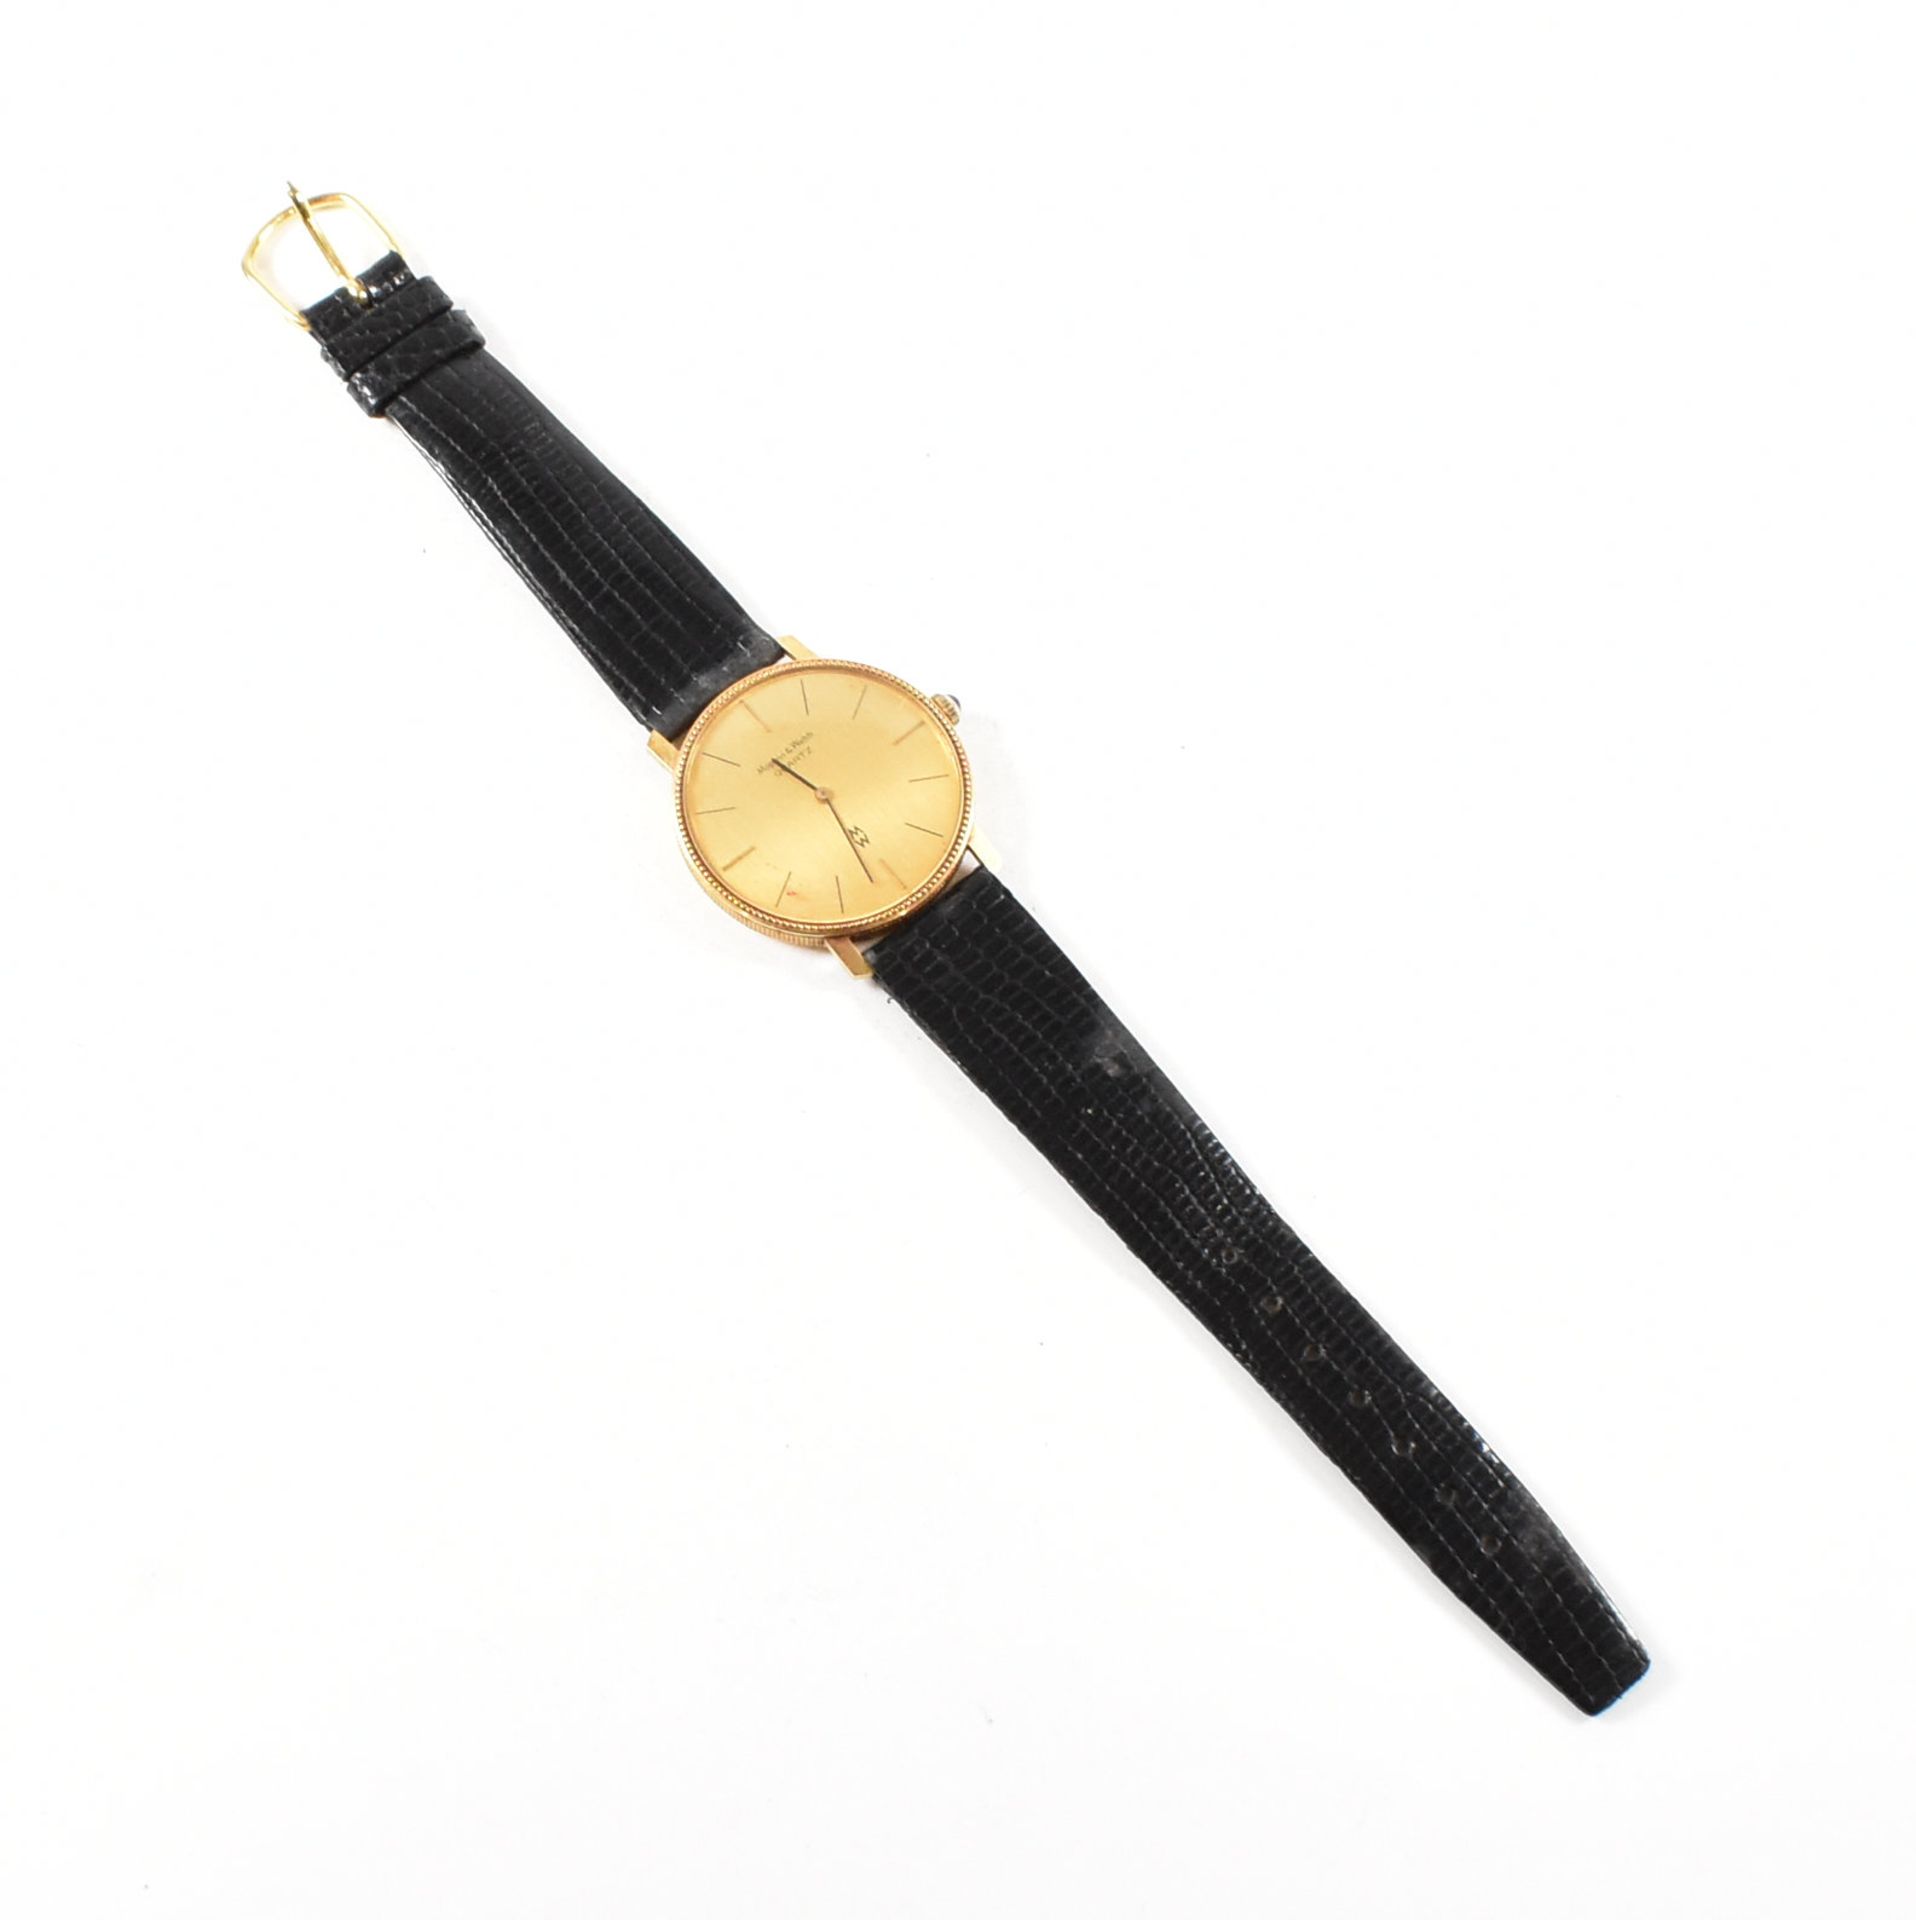 VINTAGE 18CT GOLD CASED MAPPIN & WEBB WRISTWATCH - Image 4 of 8